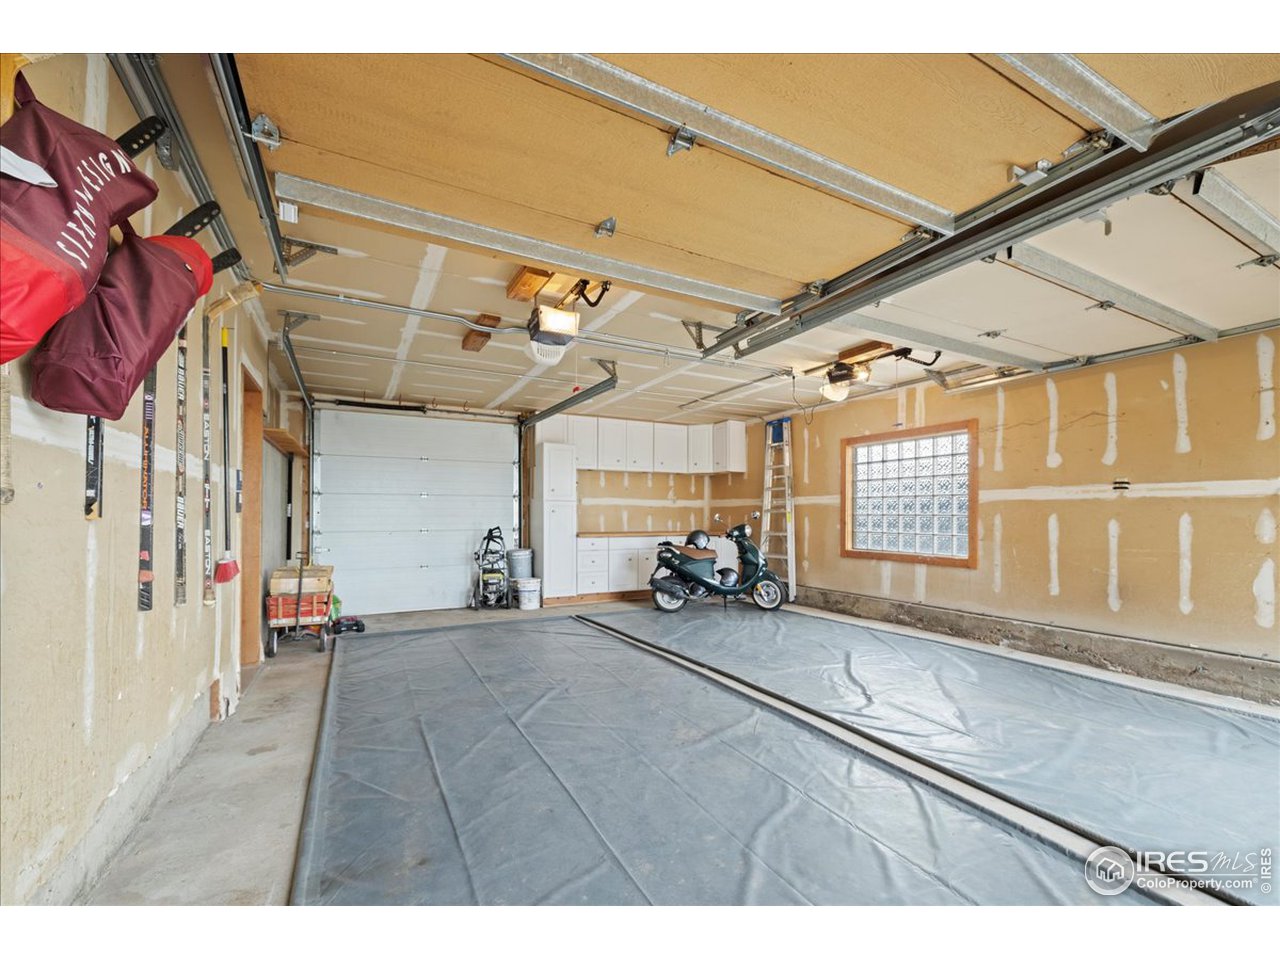 Large garage with 2 side entry